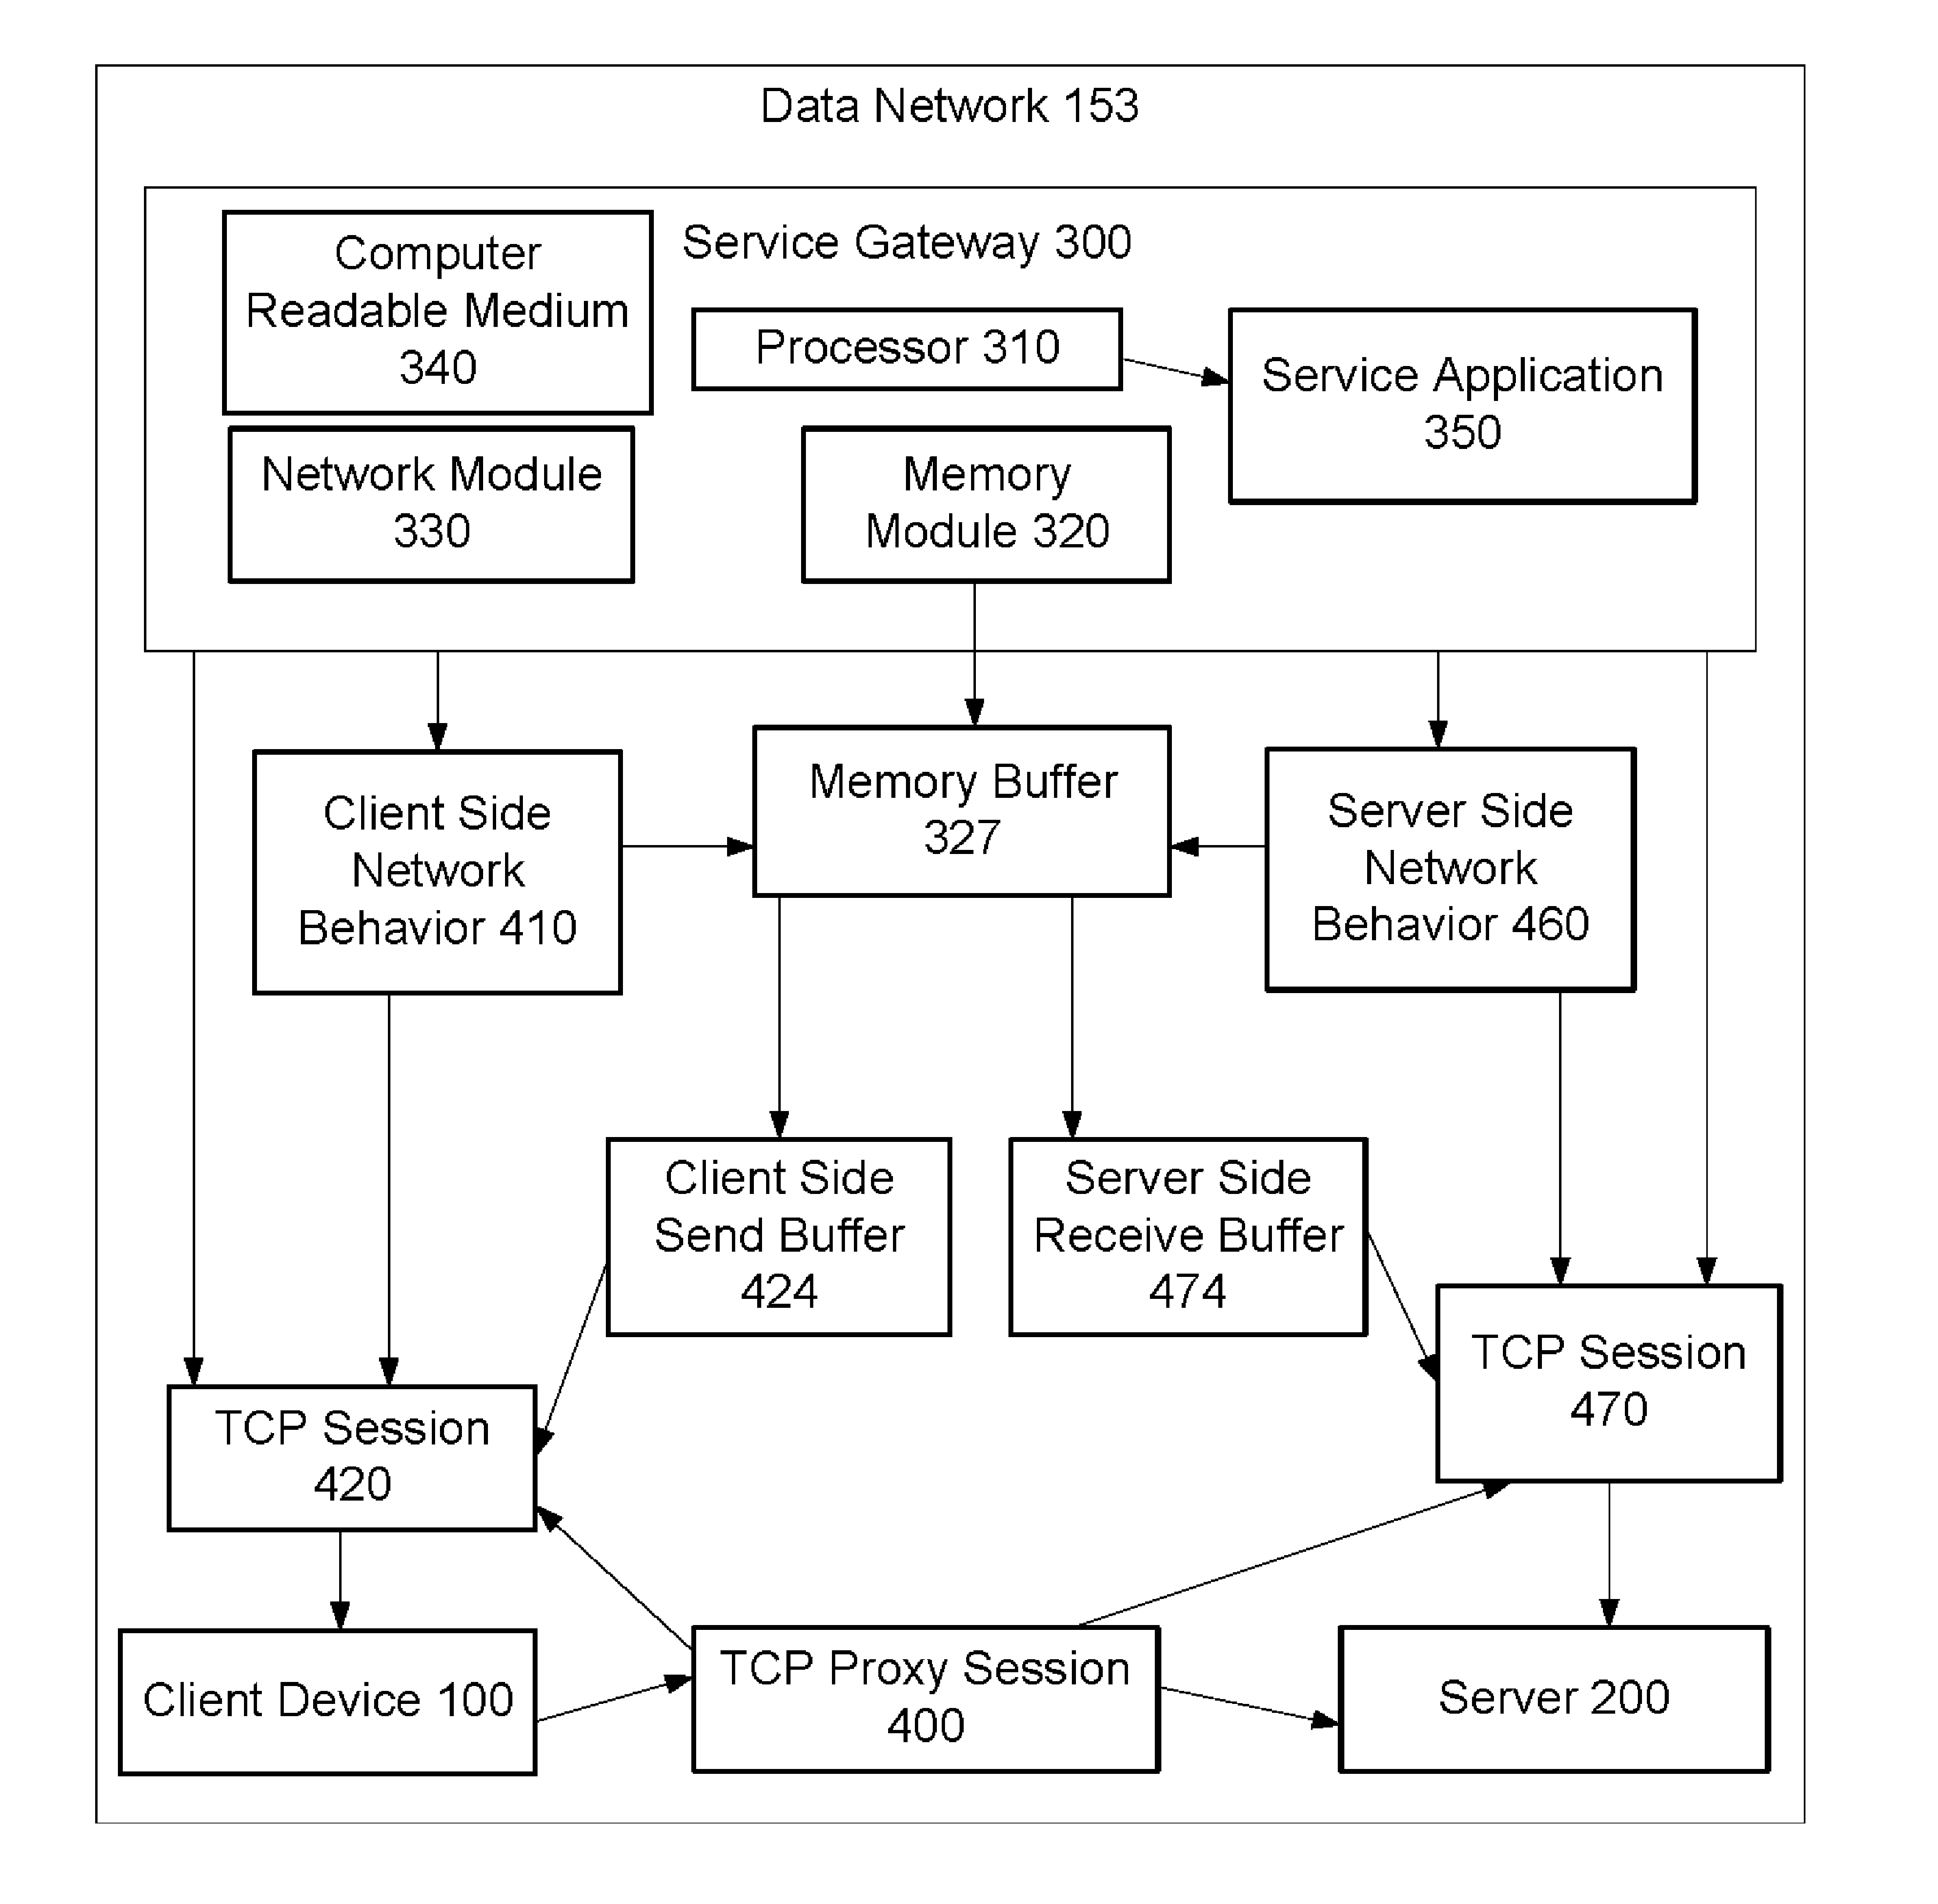 Method to Allocate Buffer for TCP Proxy Session Based on Dynamic Network Conditions